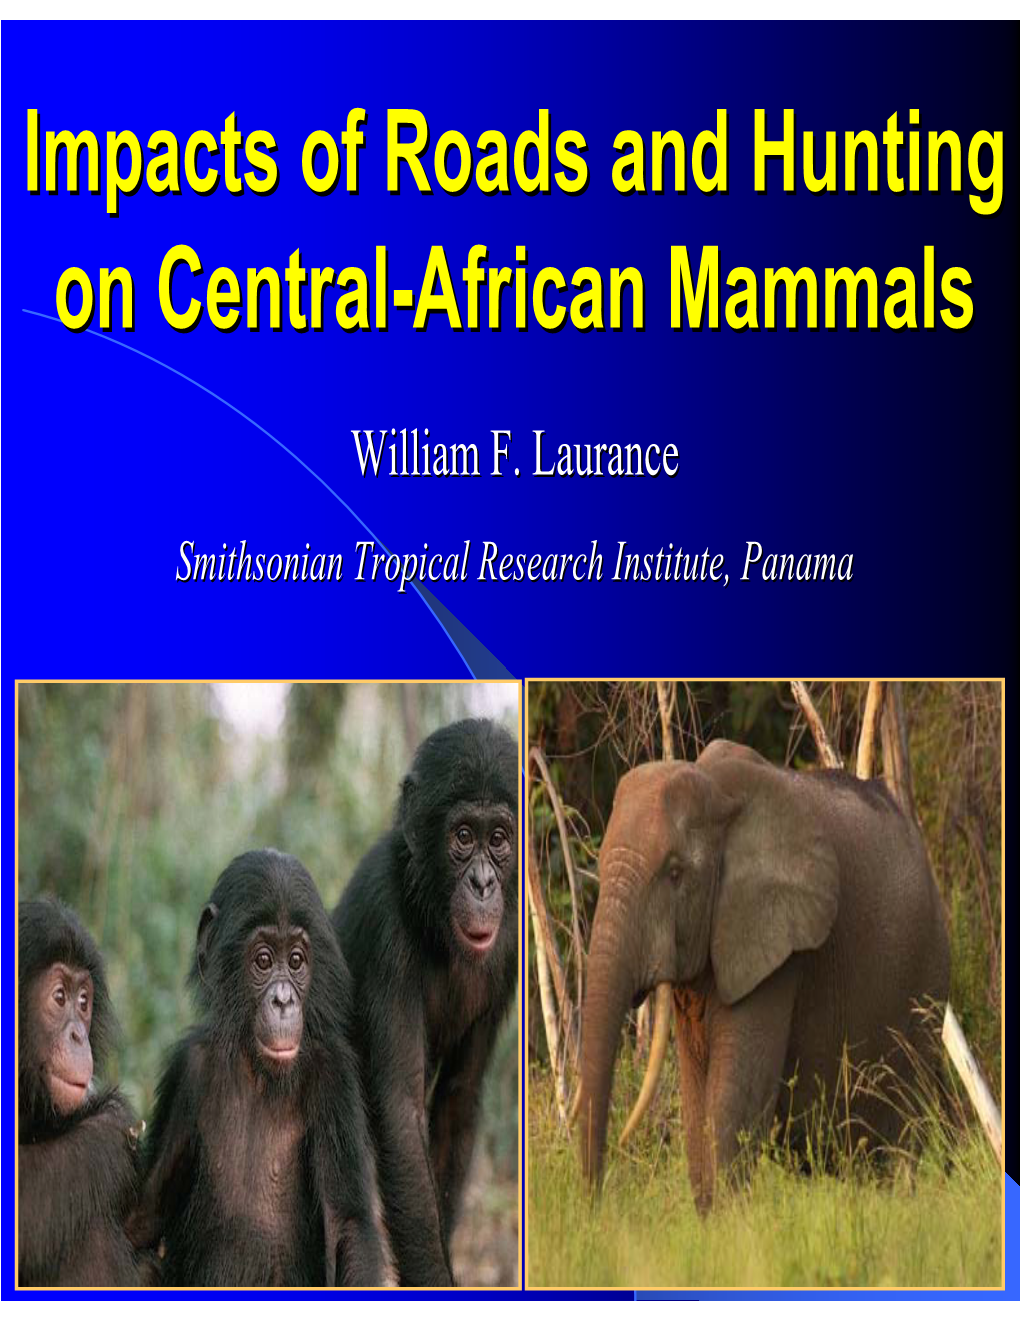 Impacts of Roads and Hunting on Central-African Mammals